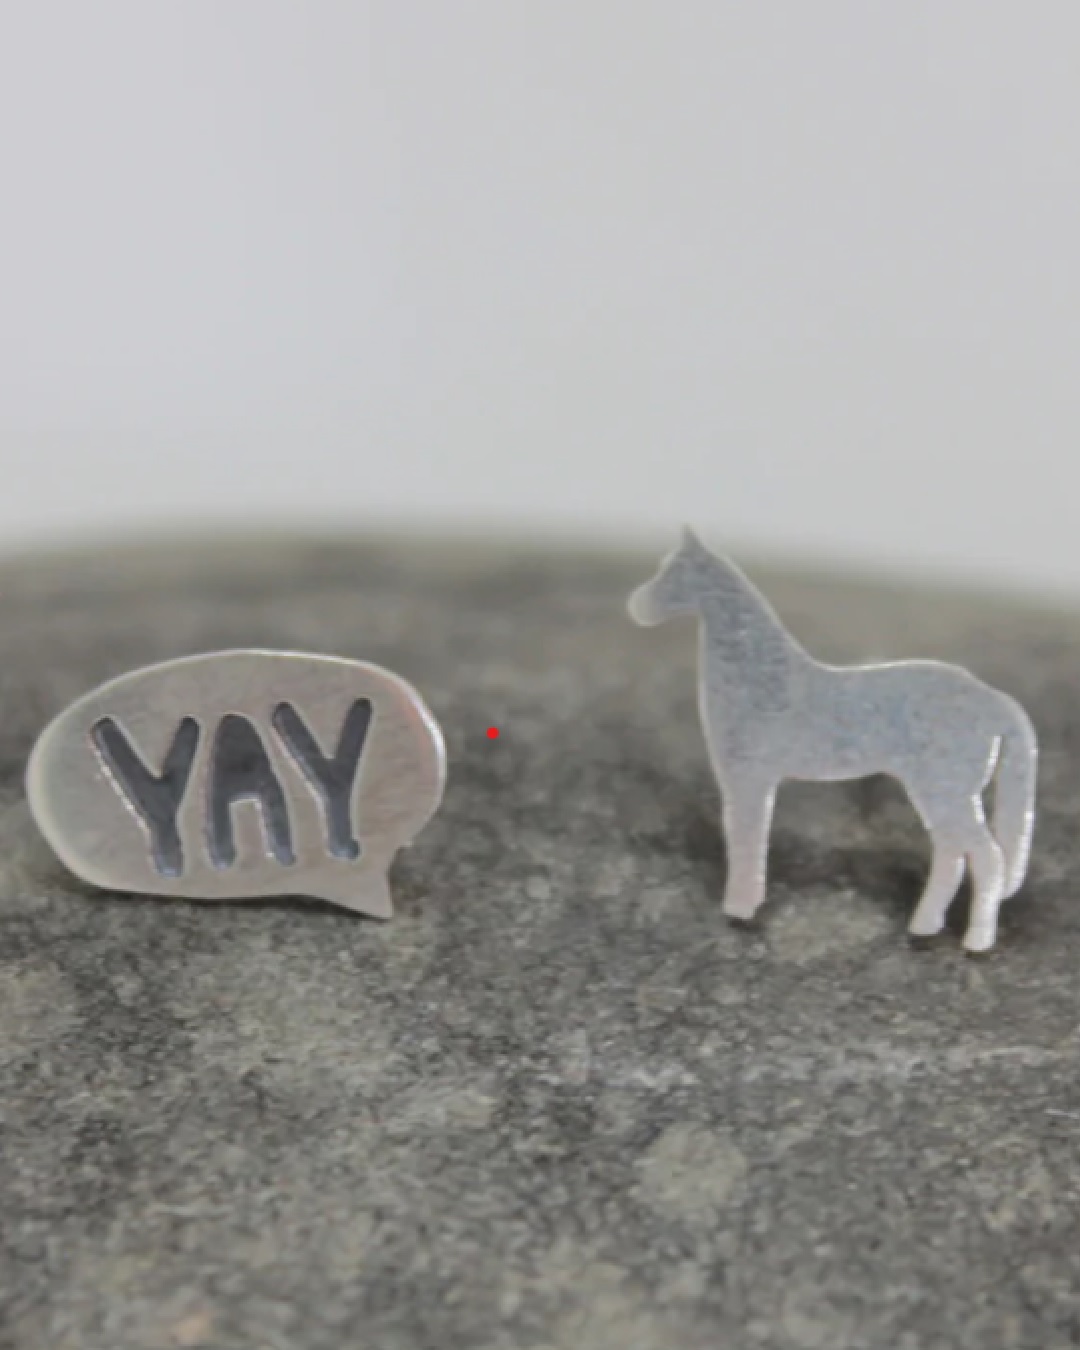 Silver earrings on a rock of a speech mark with yay and a horse